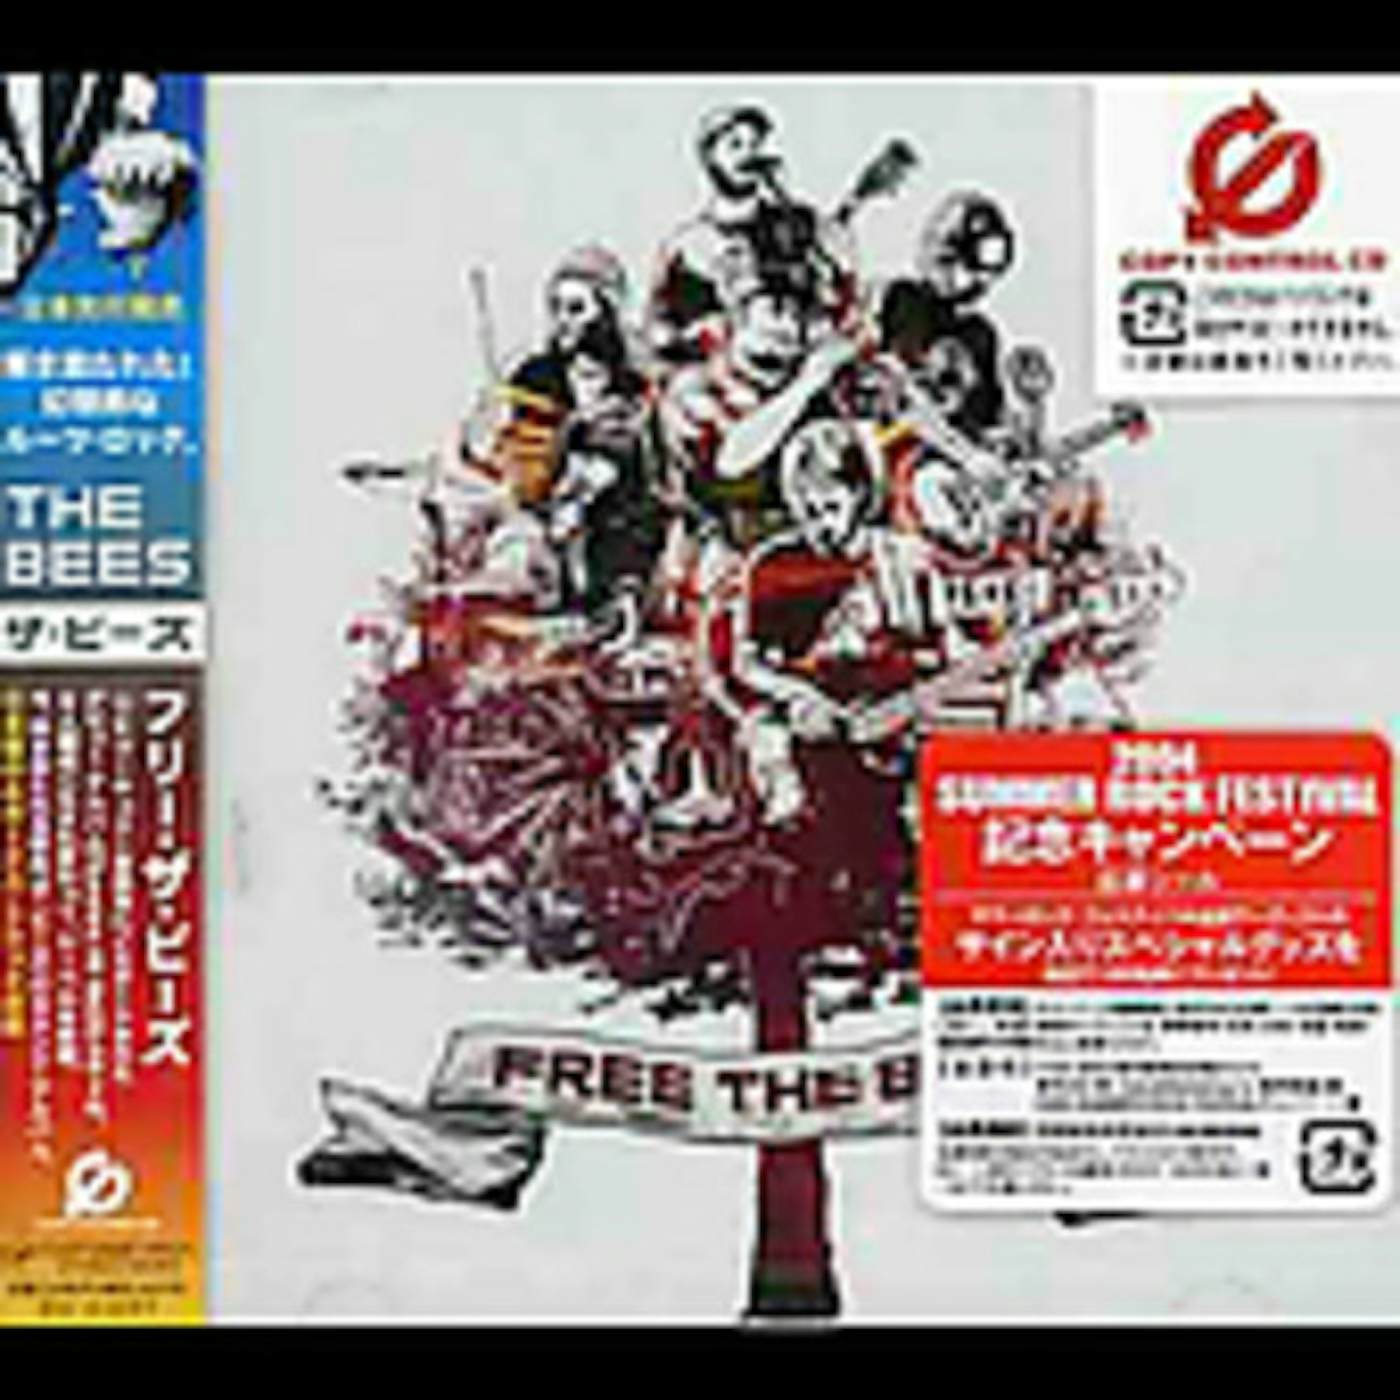 The Bees FREE CD